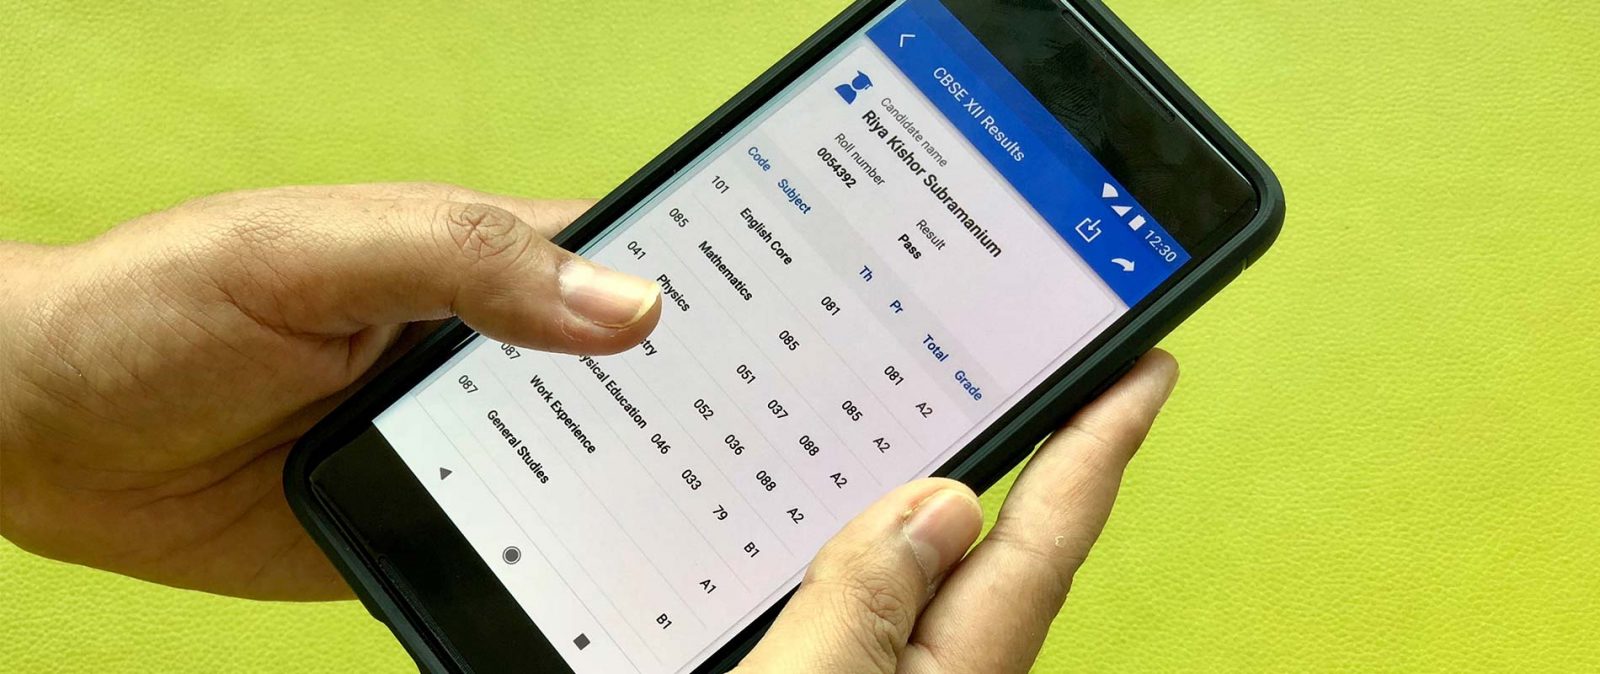 A close-up of a smartphone displaying CBSE board exam results